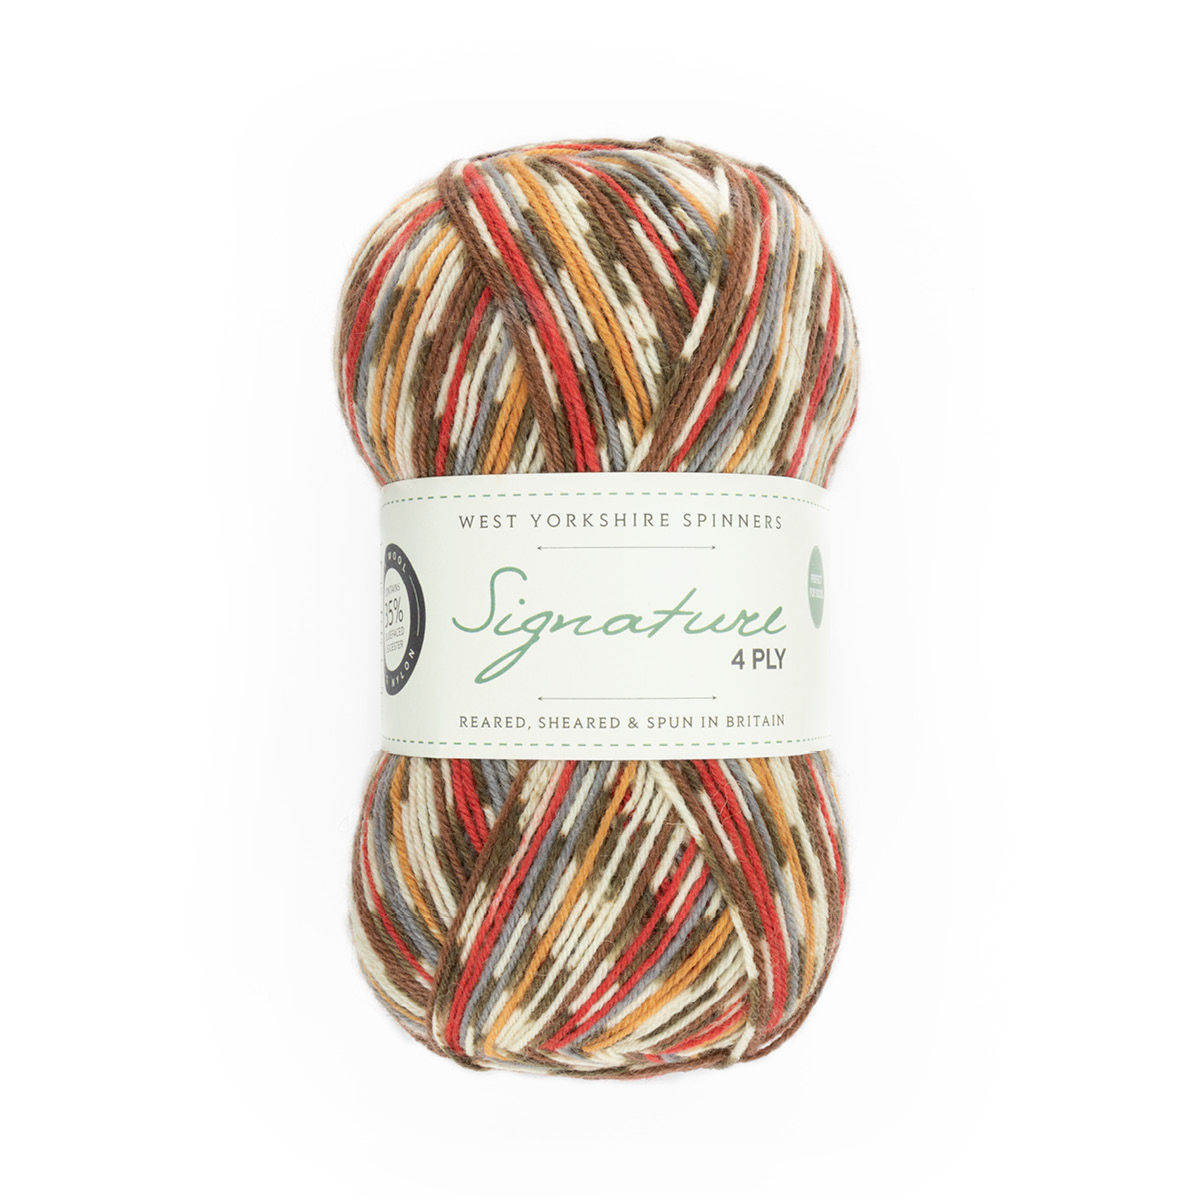 West Yorkshire Spinners Signature 4ply – Christmas Collection product image